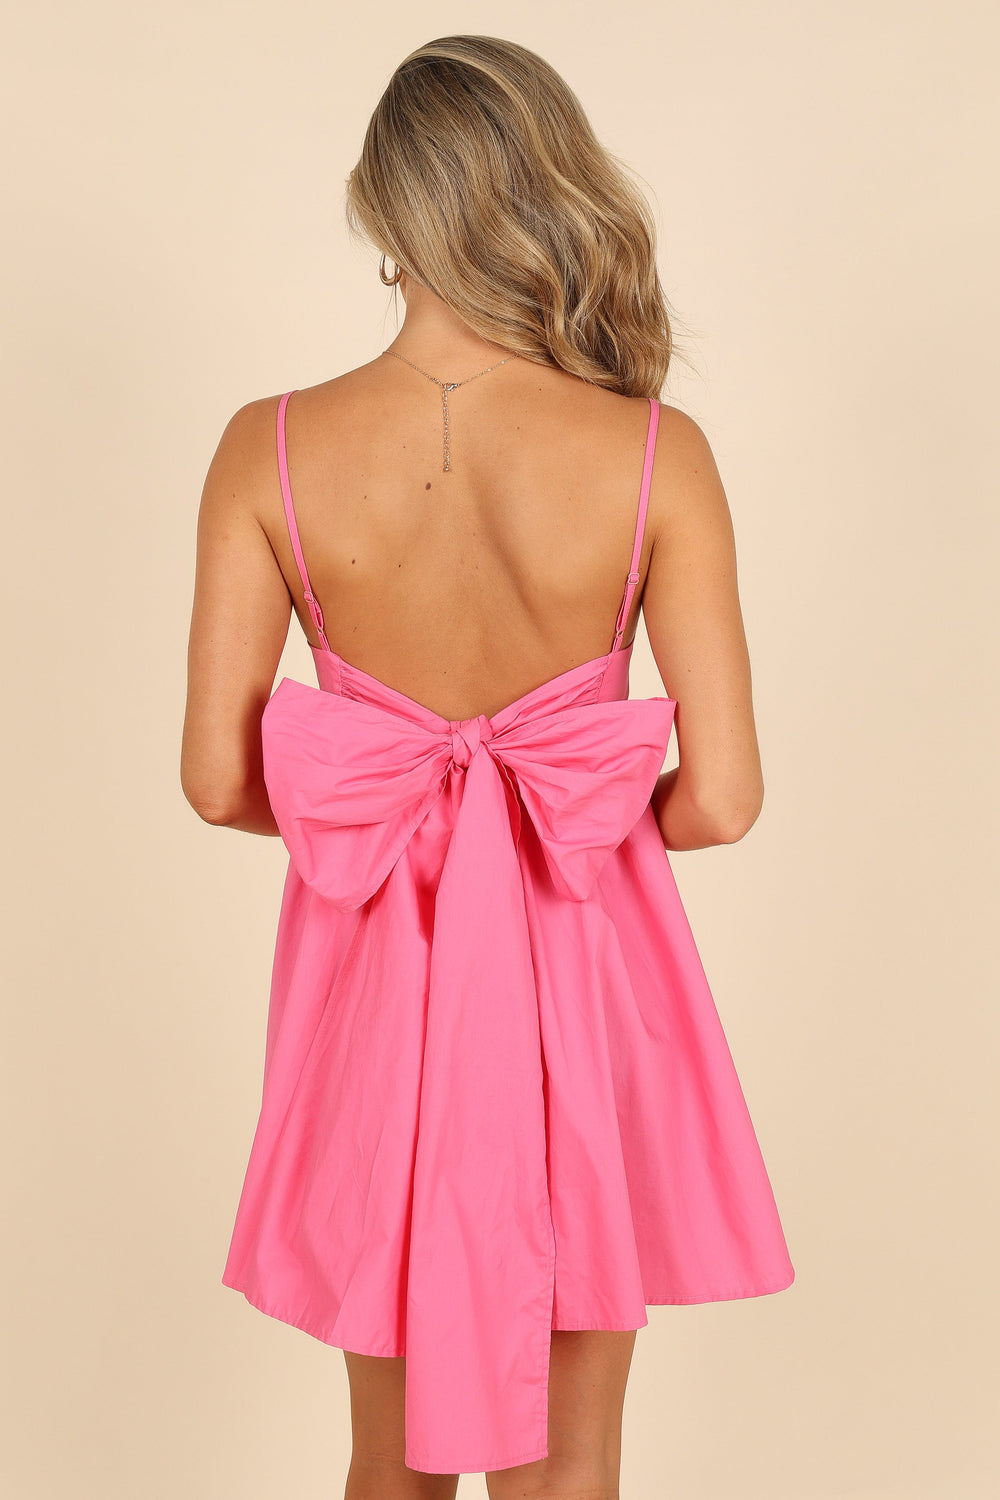 dress with bows